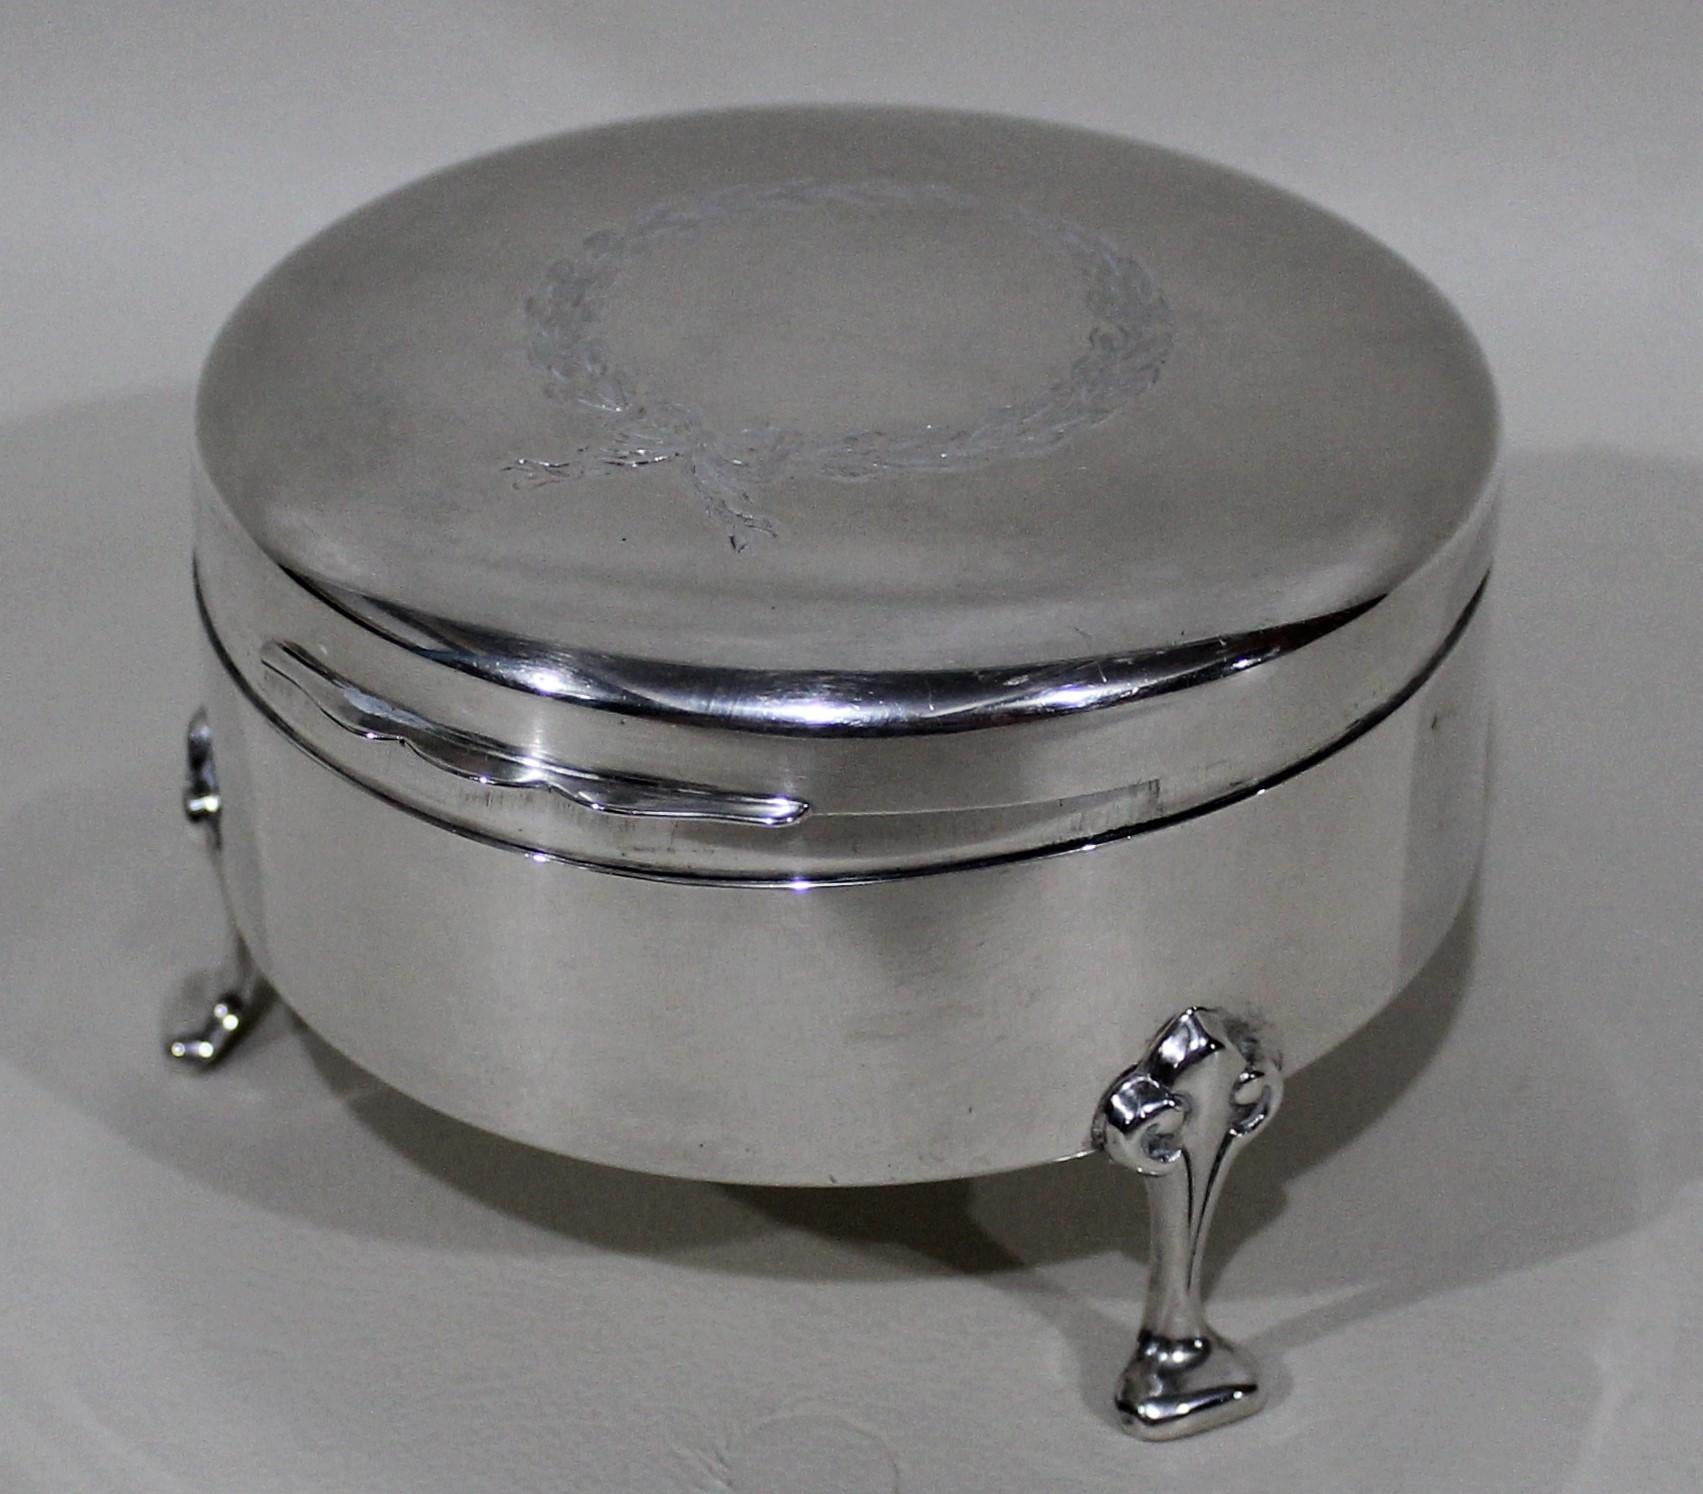 Birks sterling silver ring box. Rings pictured are not included.